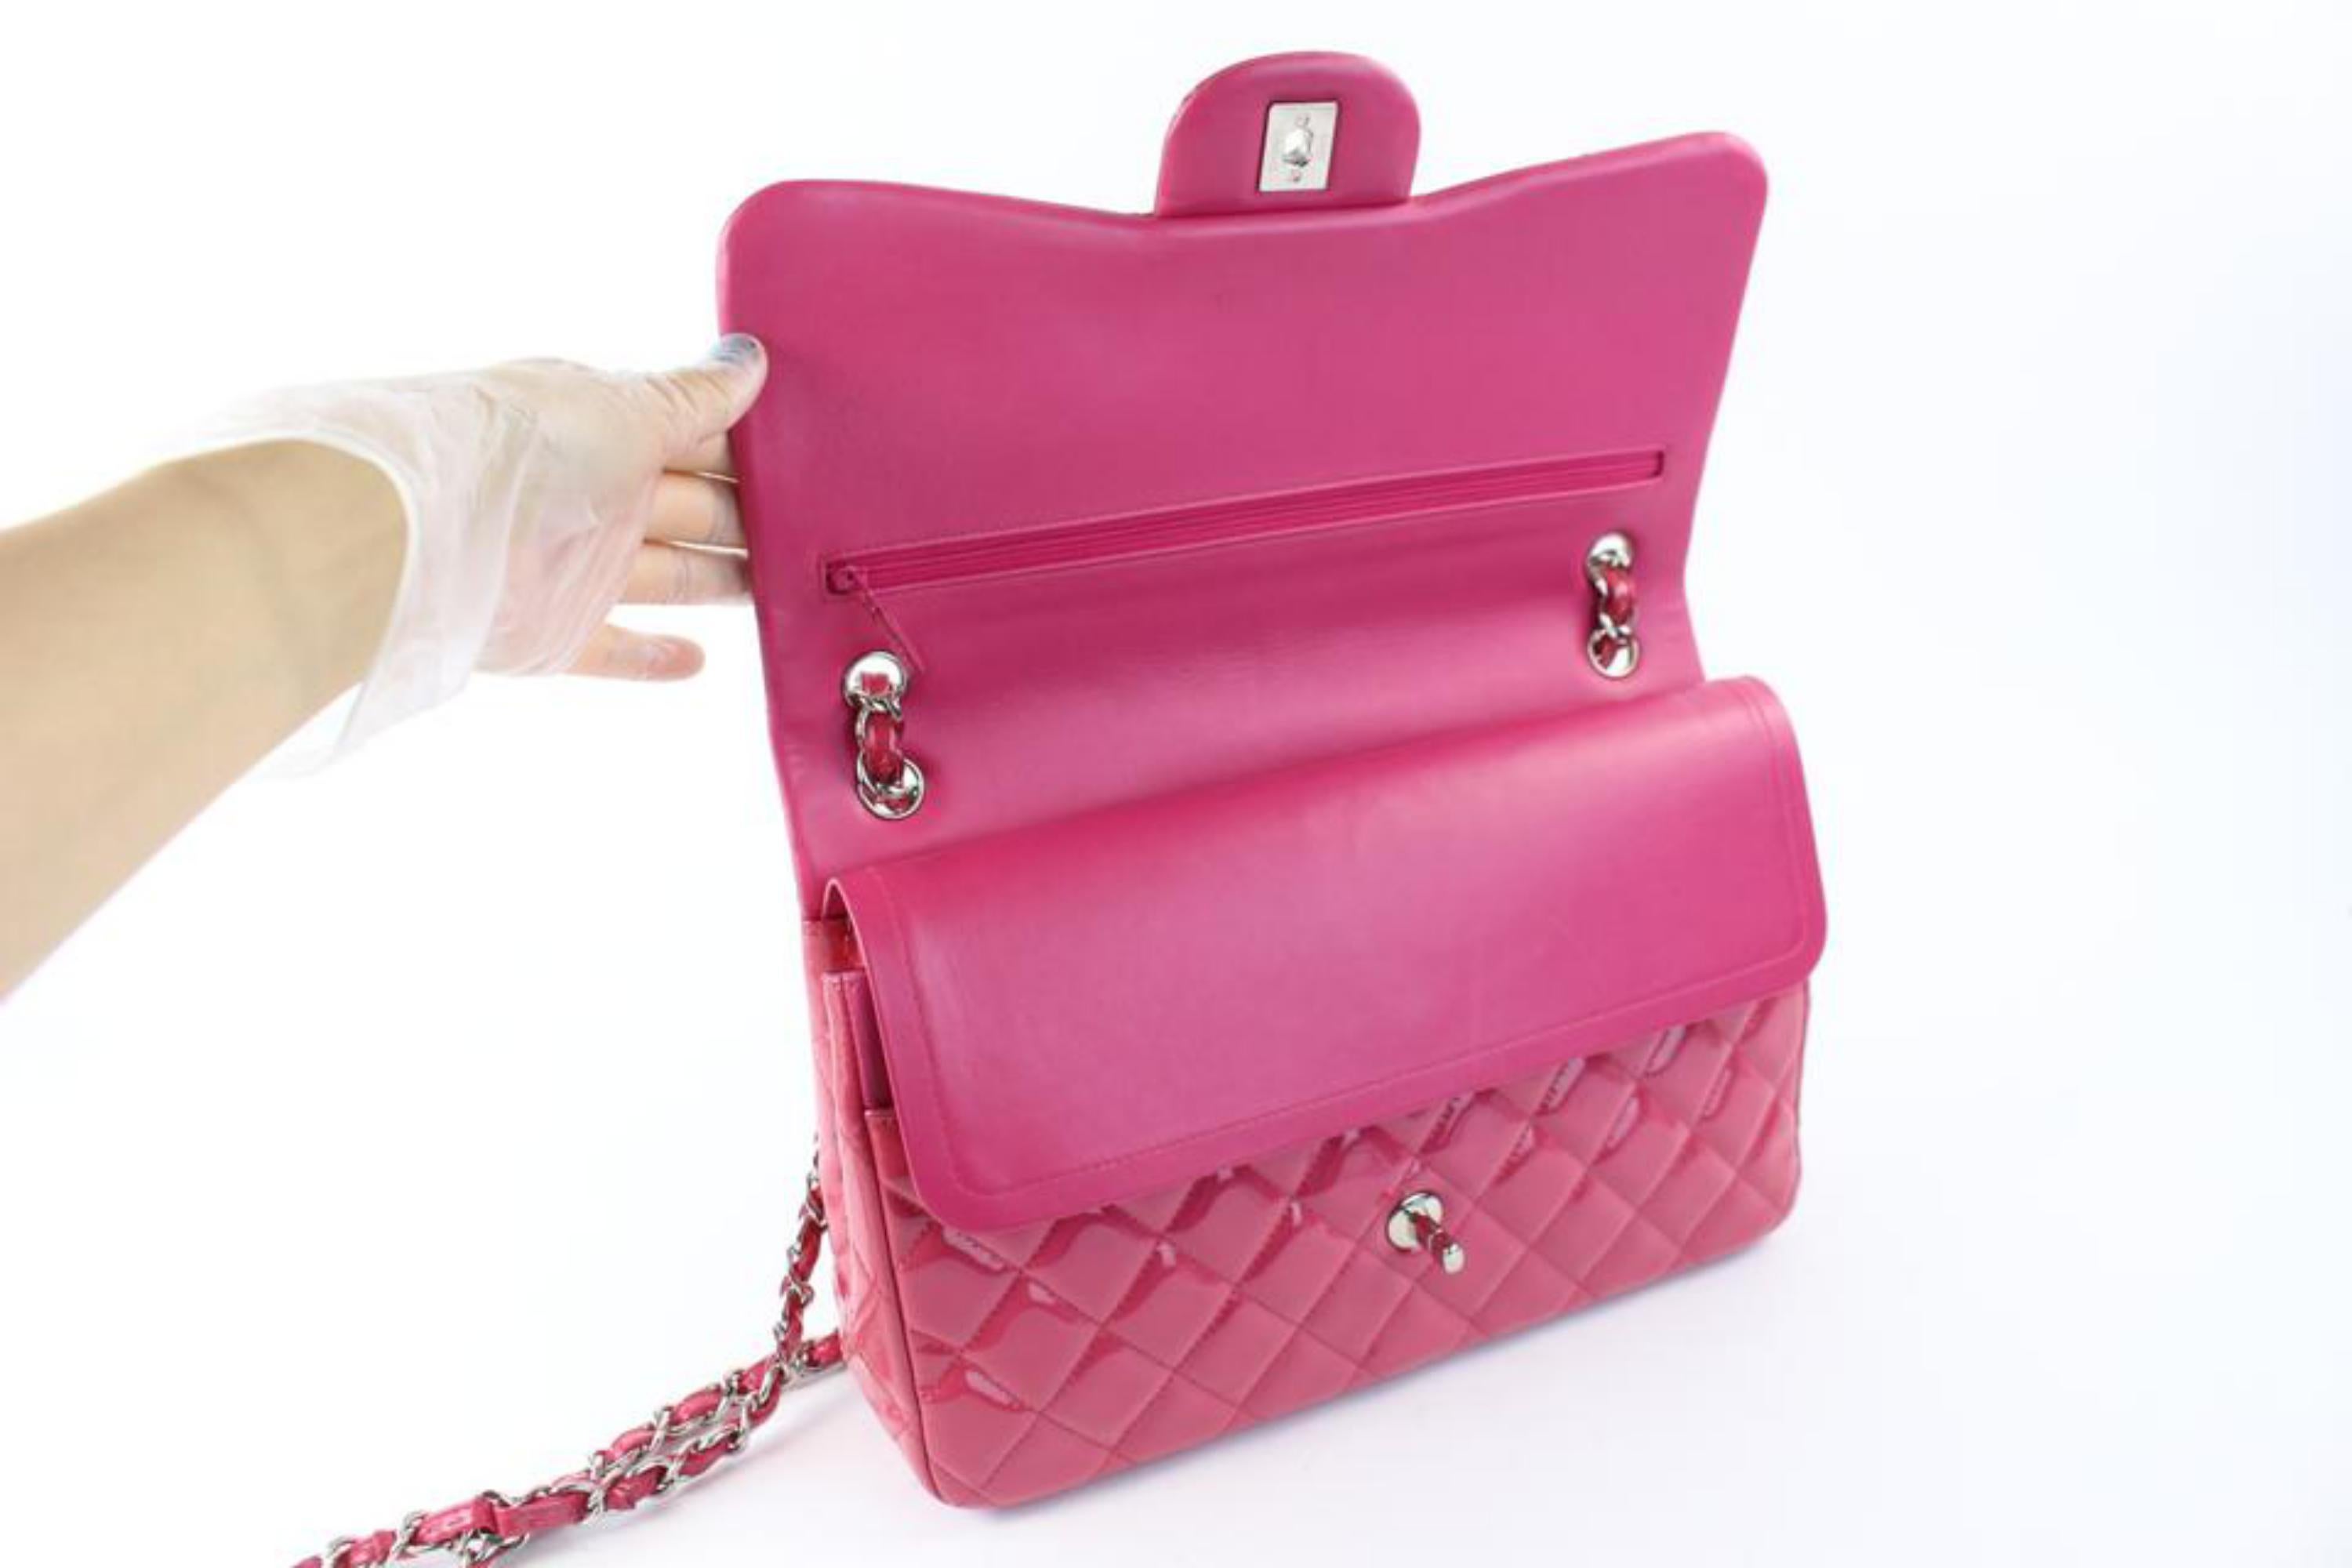 Women's Chanel Classic Quilted Jumbo Flap 01cz0720 Dark Pink Patent Leather Shoulder Bag